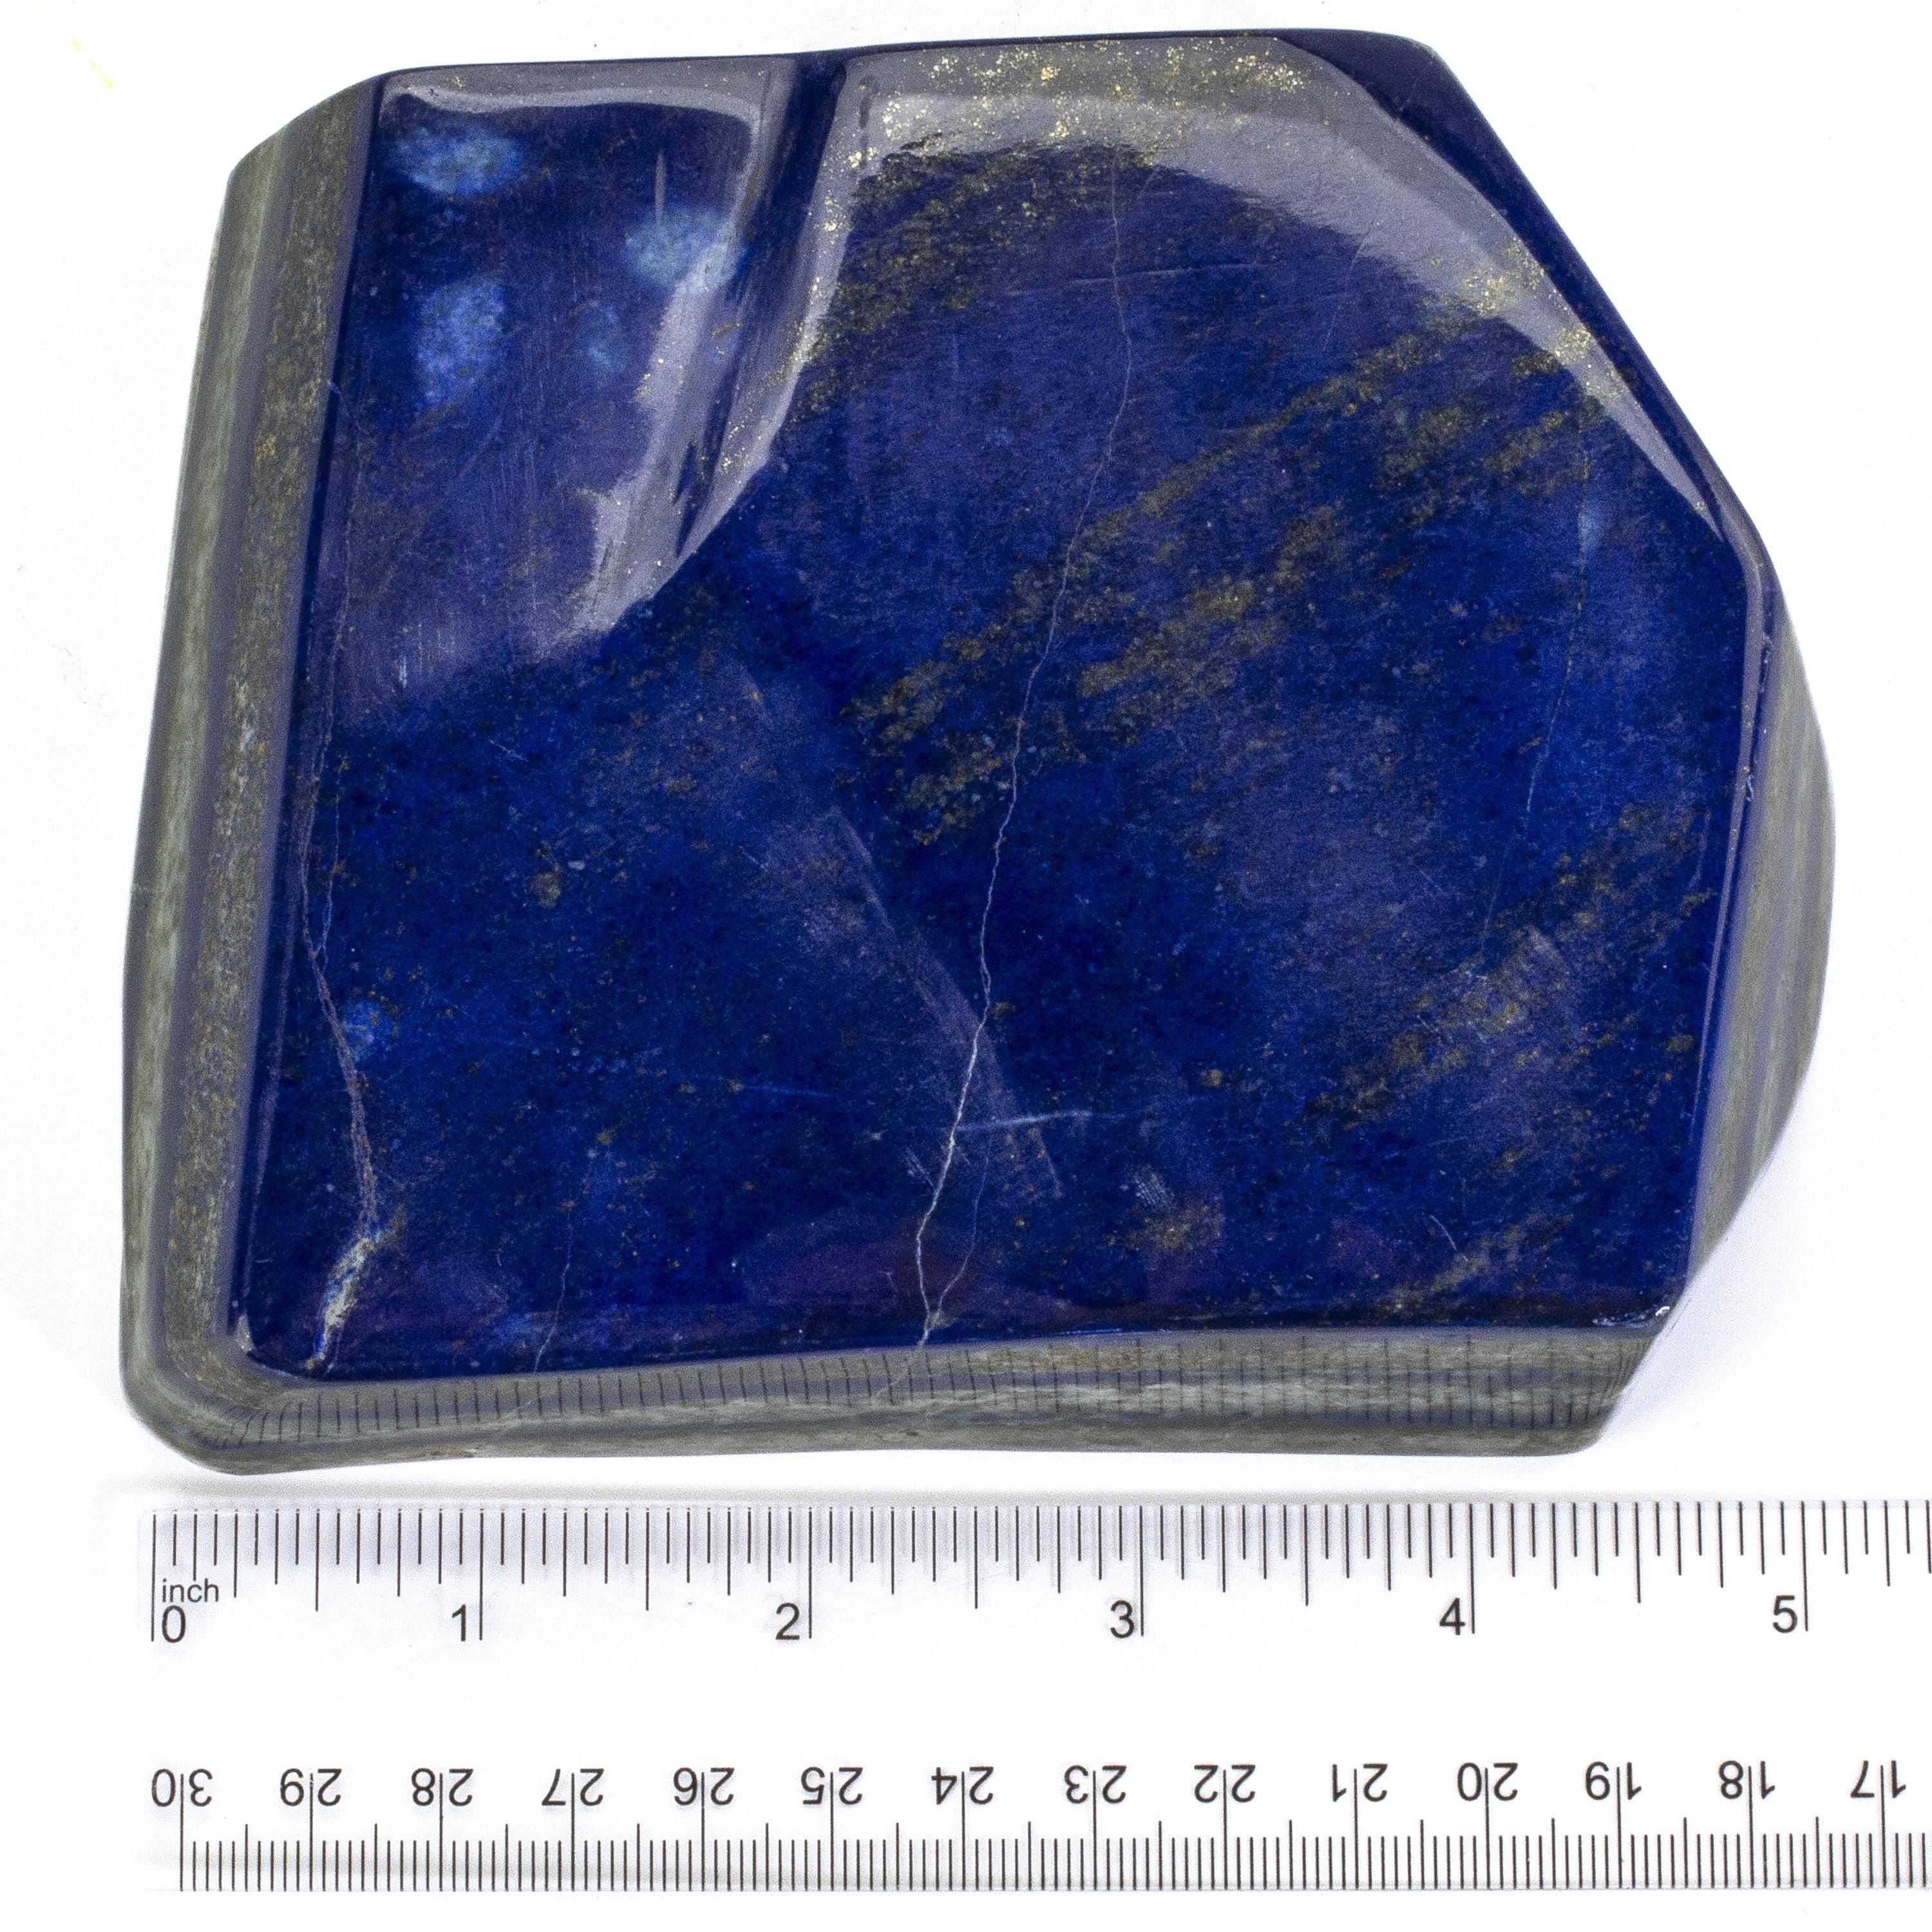 Kalifano Lapis Lapis Lazuil Freeform from Afghanistan - 1.2 kg / 2.6 lbs LP1300.002